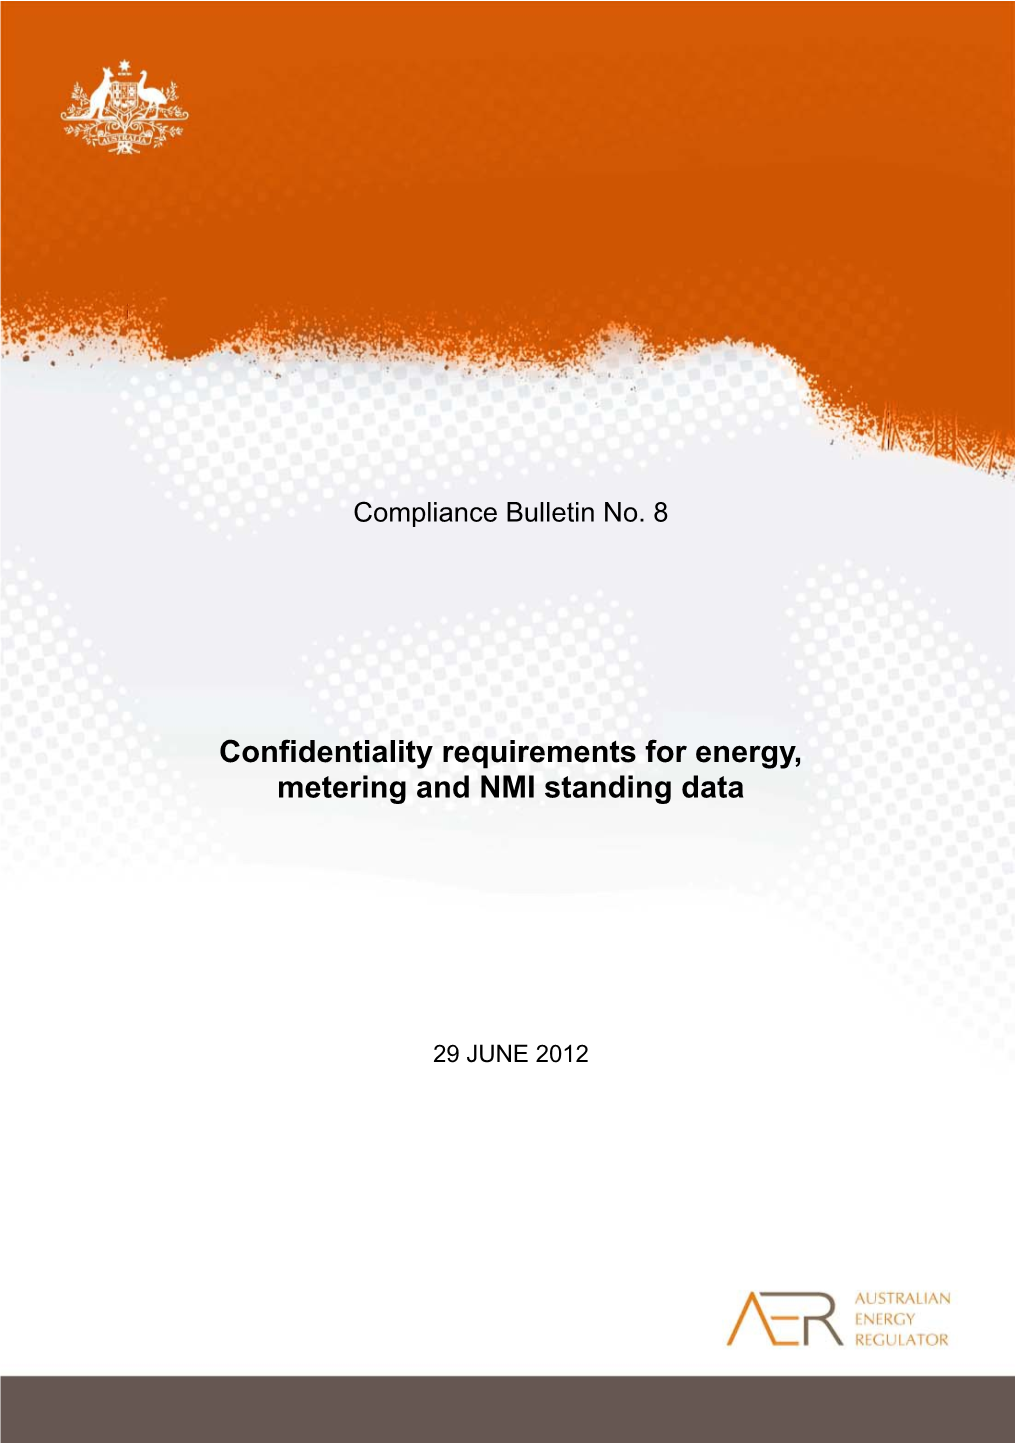 Confidentiality Requirements for Energy, Metering and NMI Standing Data